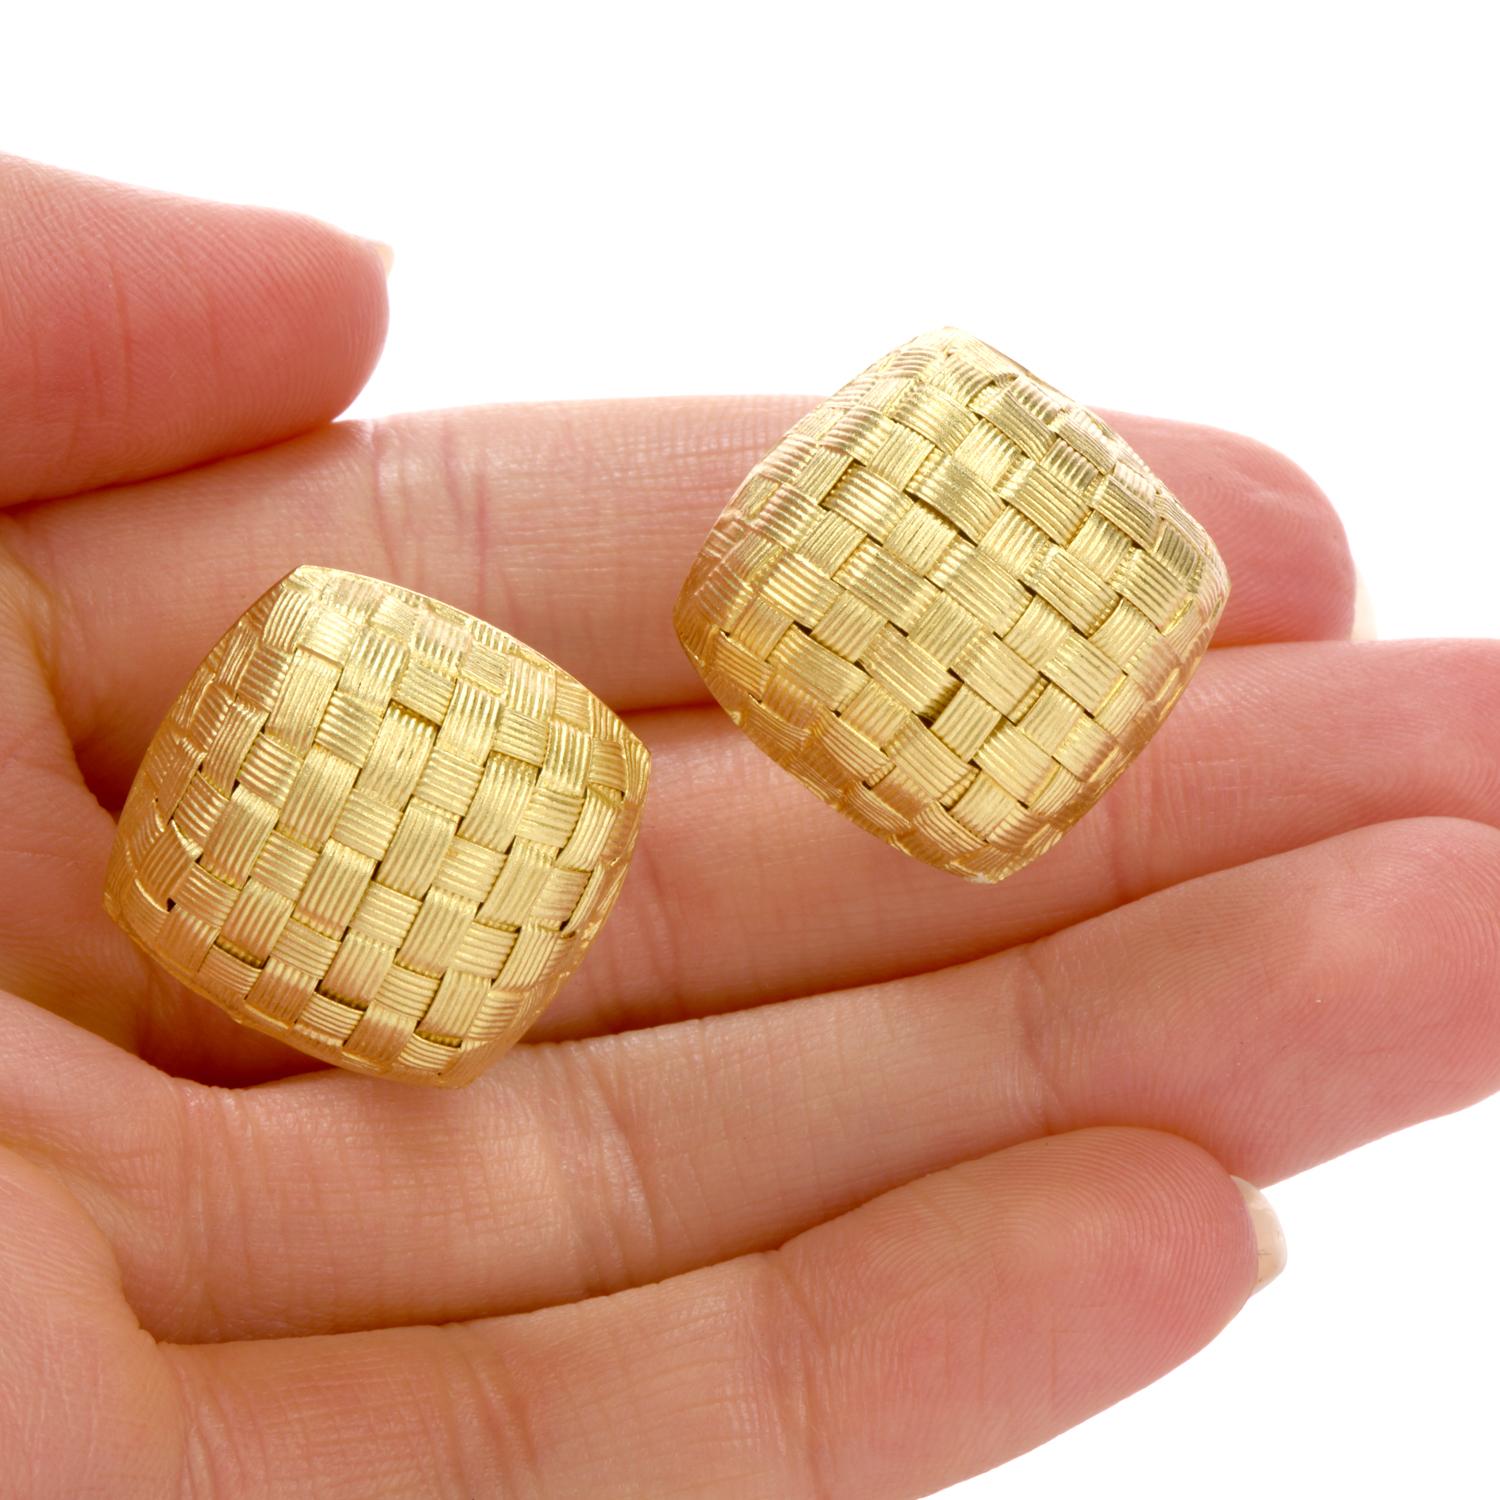 These understated, yet large earrings were fashioned

with a criss cross woven pattern and crafted

in 18K yellow gold.

Measuring appx. 22 x 22 x 10.5mm High, 

these earrings are large but understated with the carvings and matte design that

offer